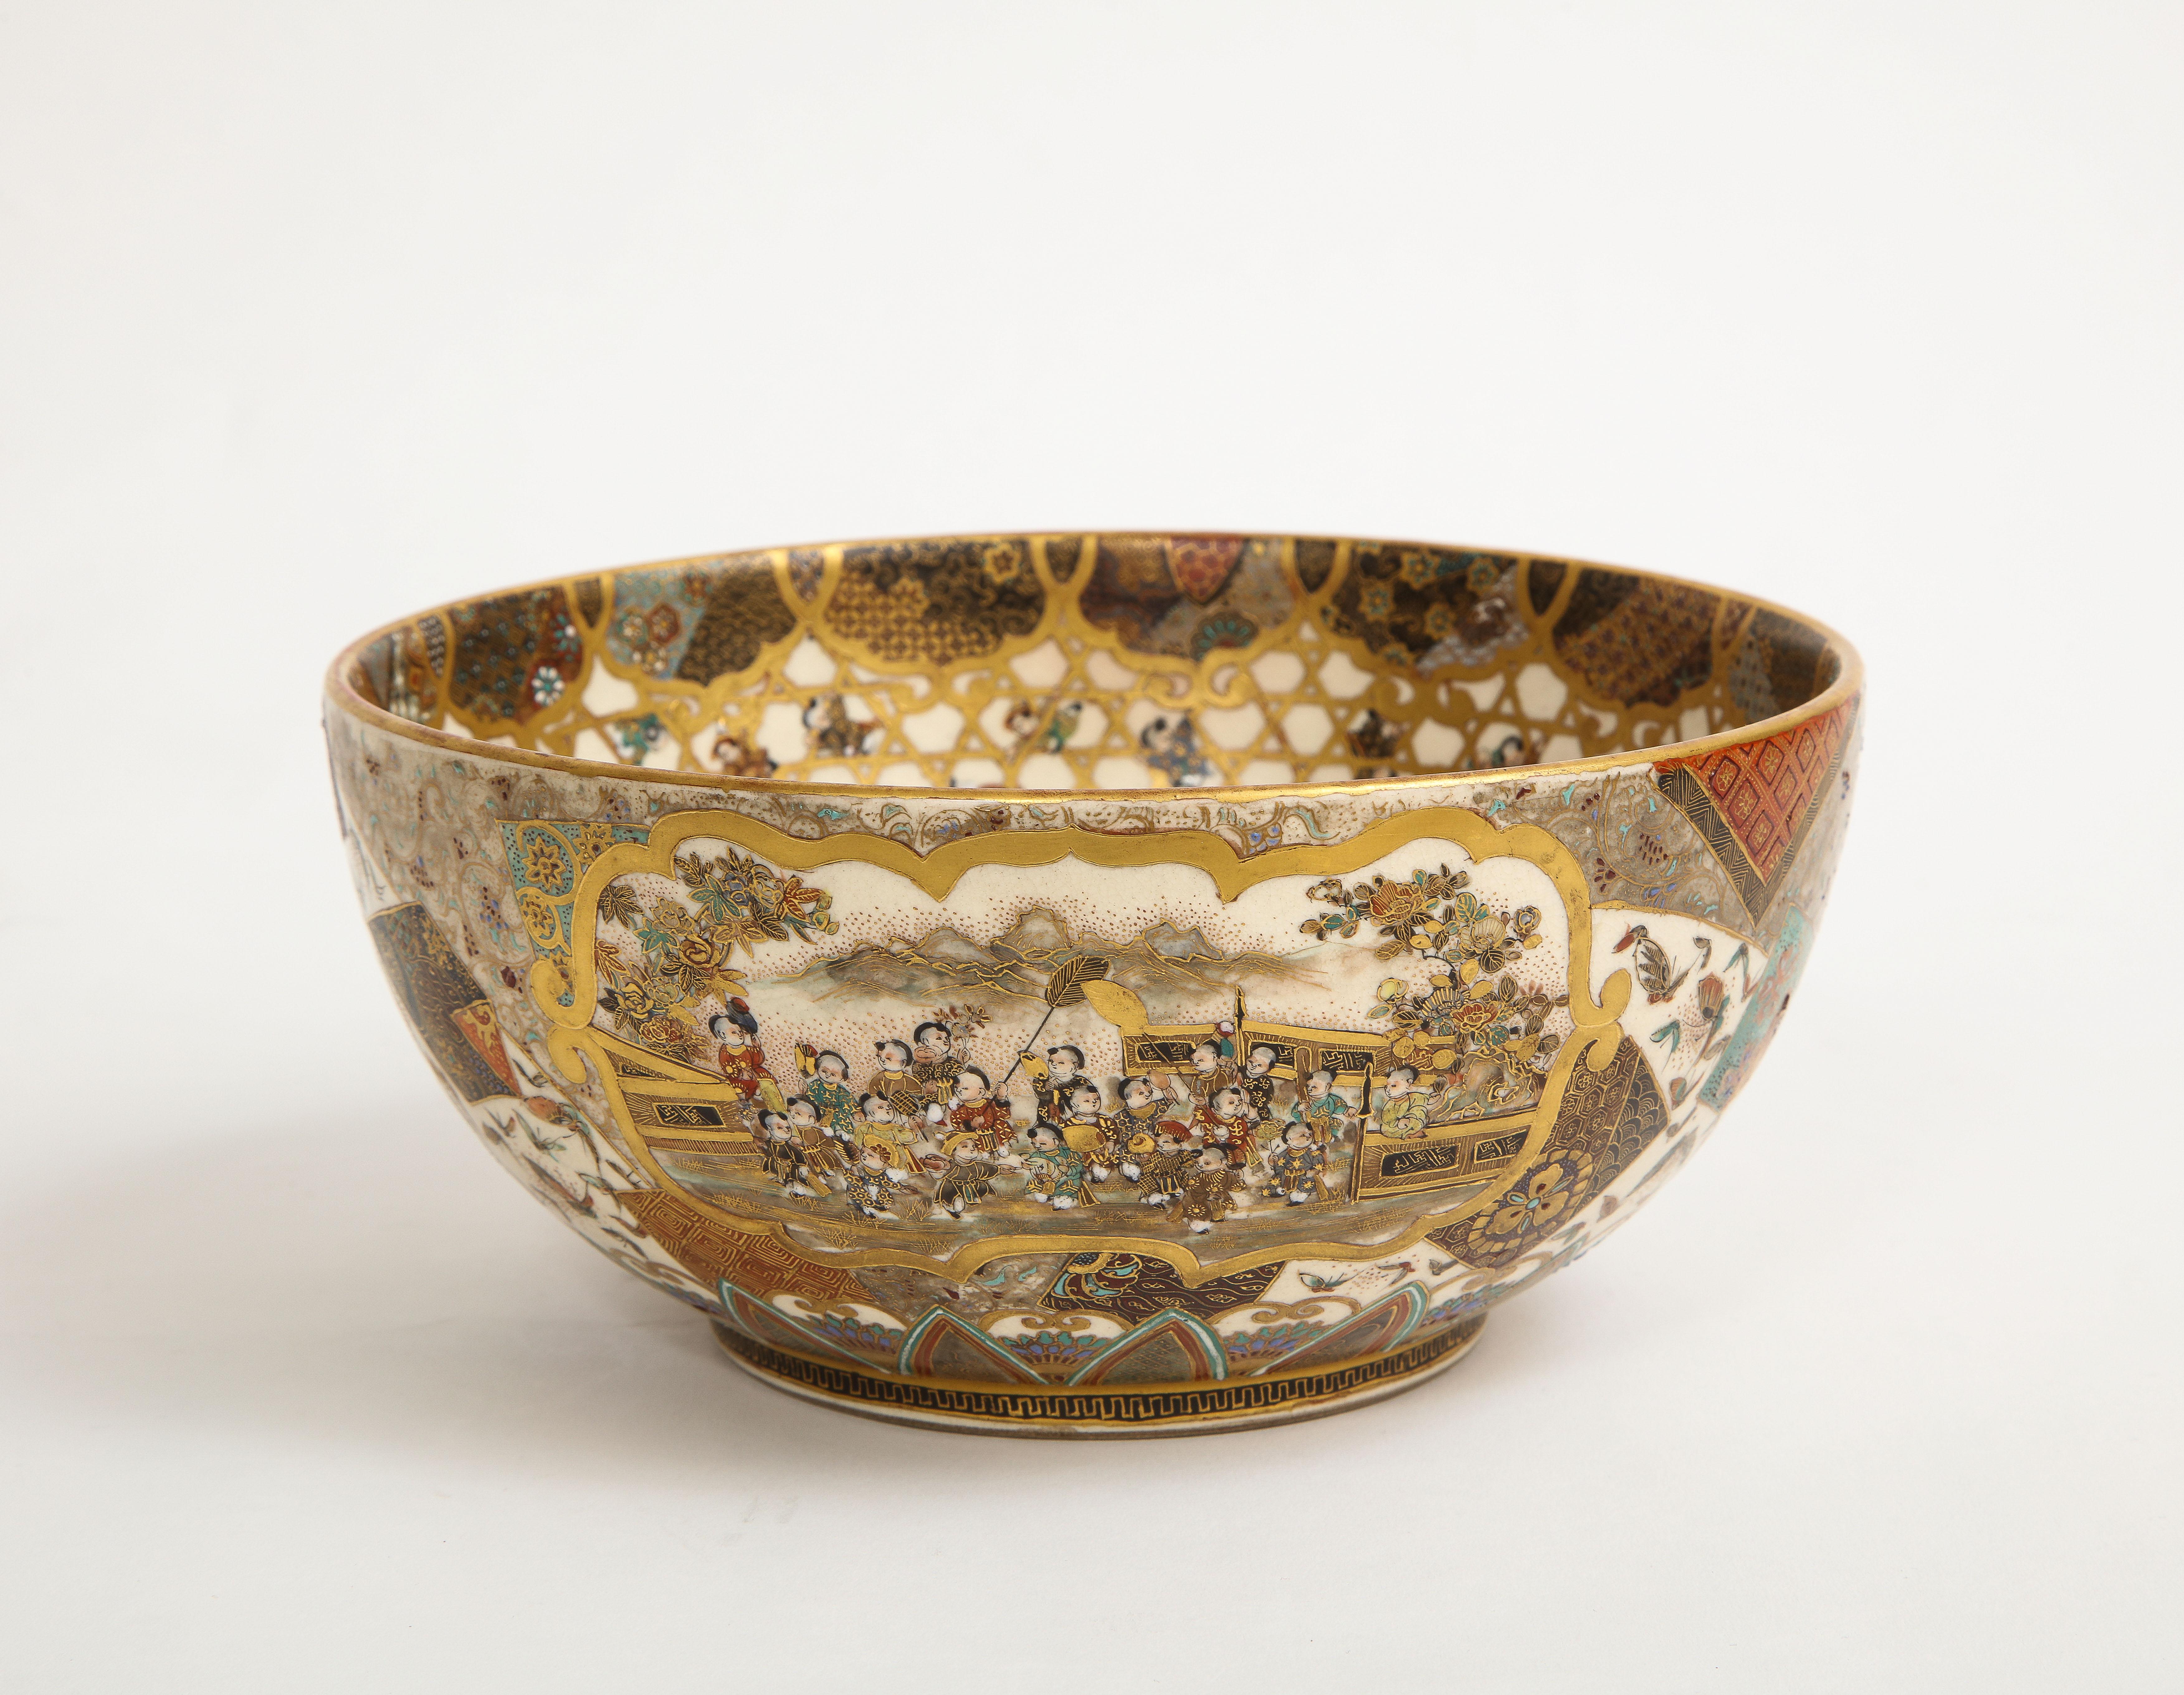 A fine quality 19th century Japanese Satsuma bowl from the Meiji Era, Most Probably by Meizan, Signed on Bottom with Characters. This is truly a stupendous piece. It is highly decorated in polychrome enamels and gilt throughout the interior and